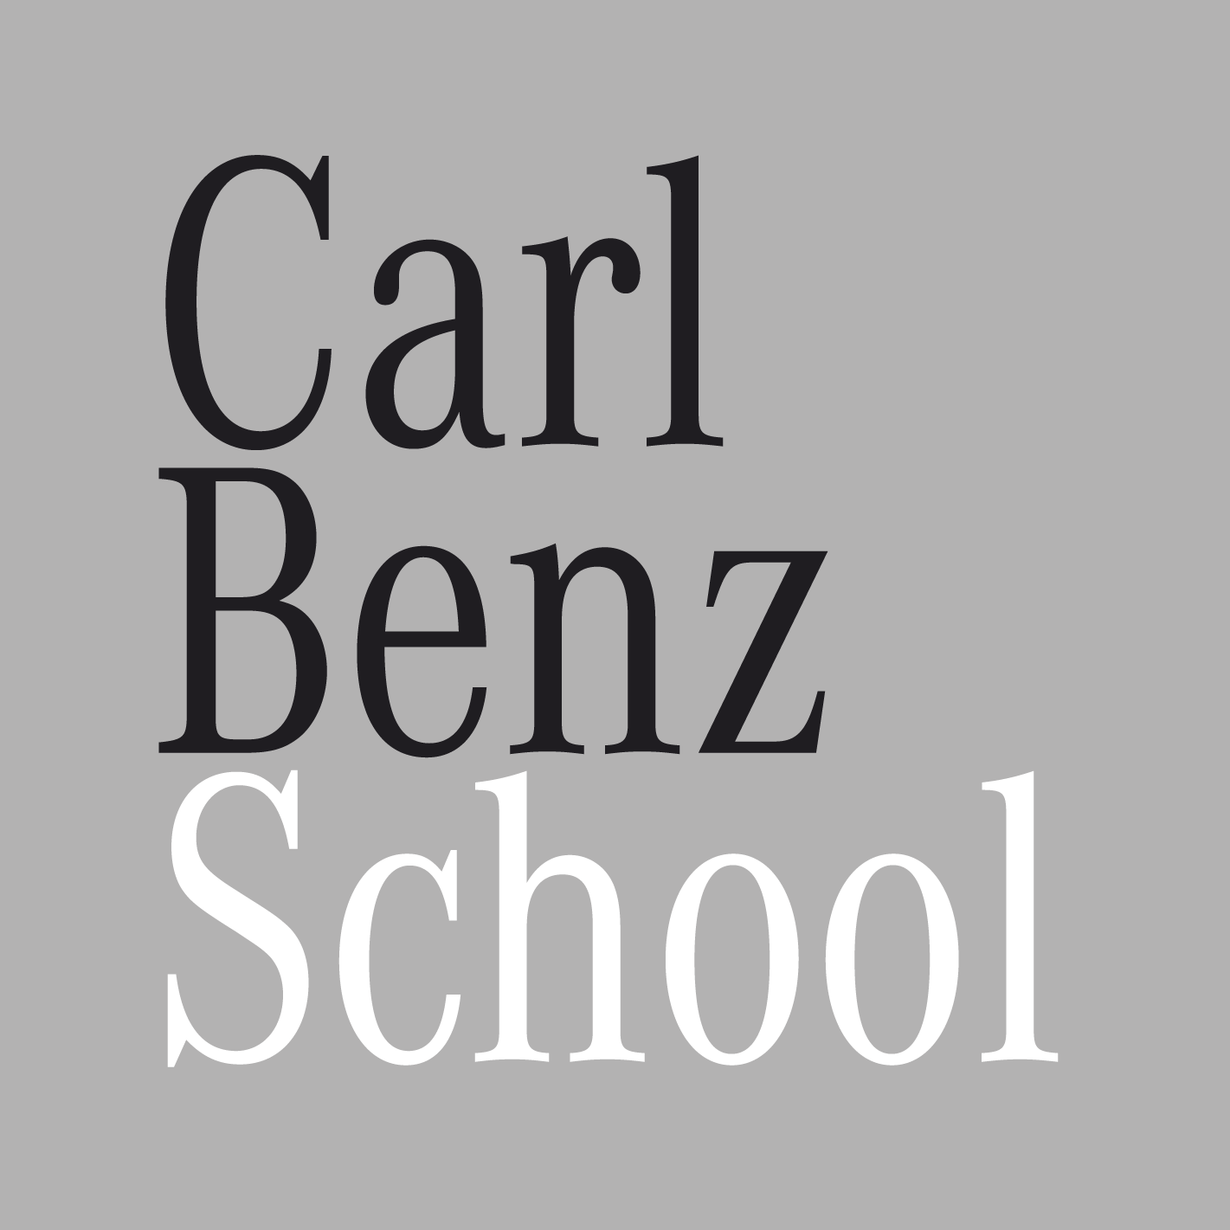 CBS admissions office, Carl Benz School